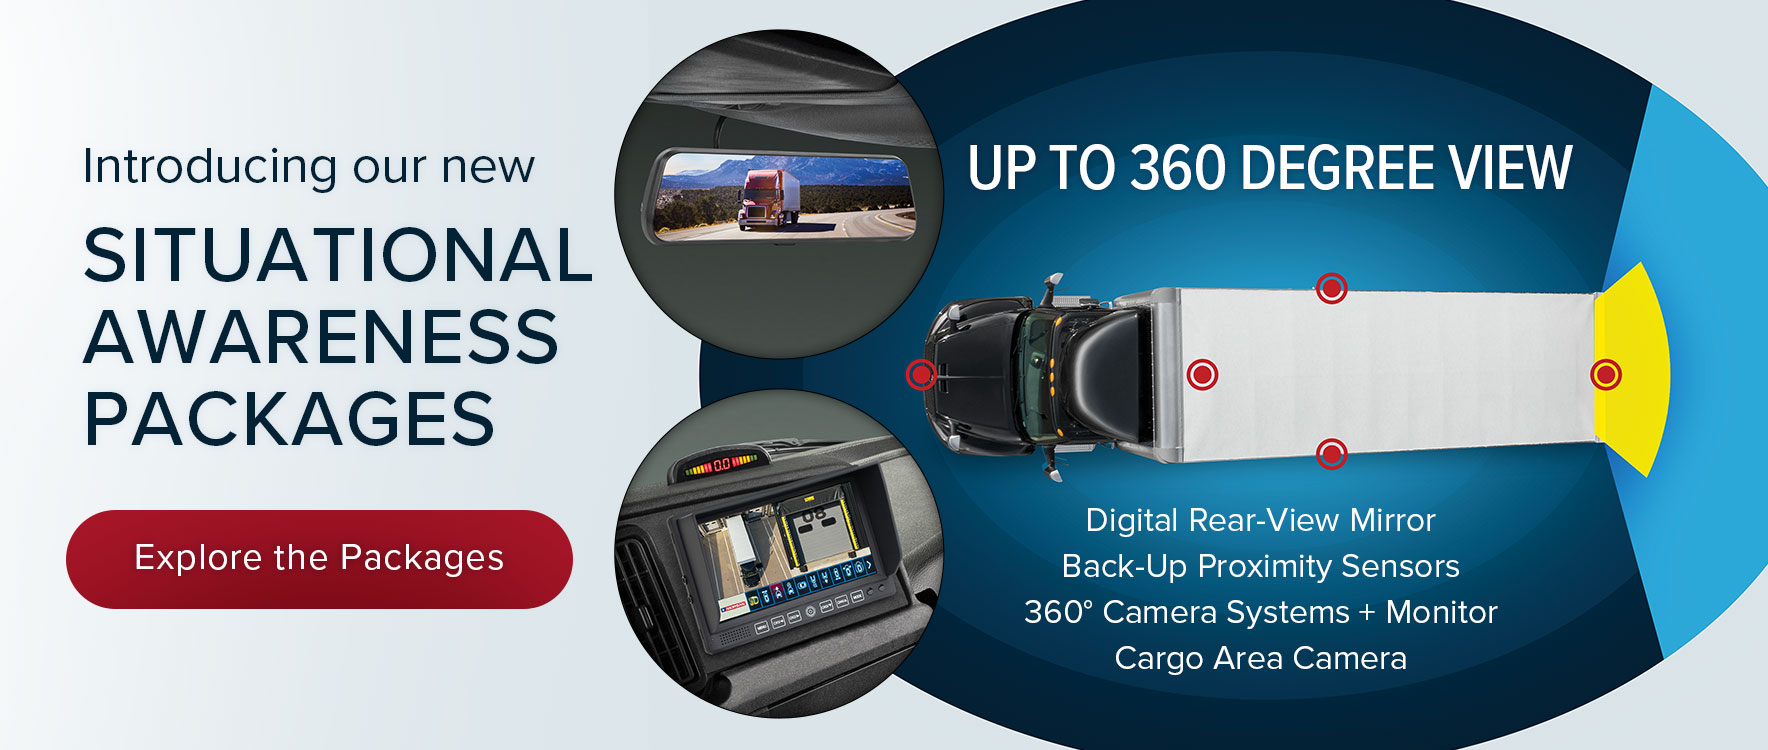 Introducing our new situational awareness packages: digital rear-view mirror, back-up proximity sensors, 360 degree camera with monitor, cargo area camera